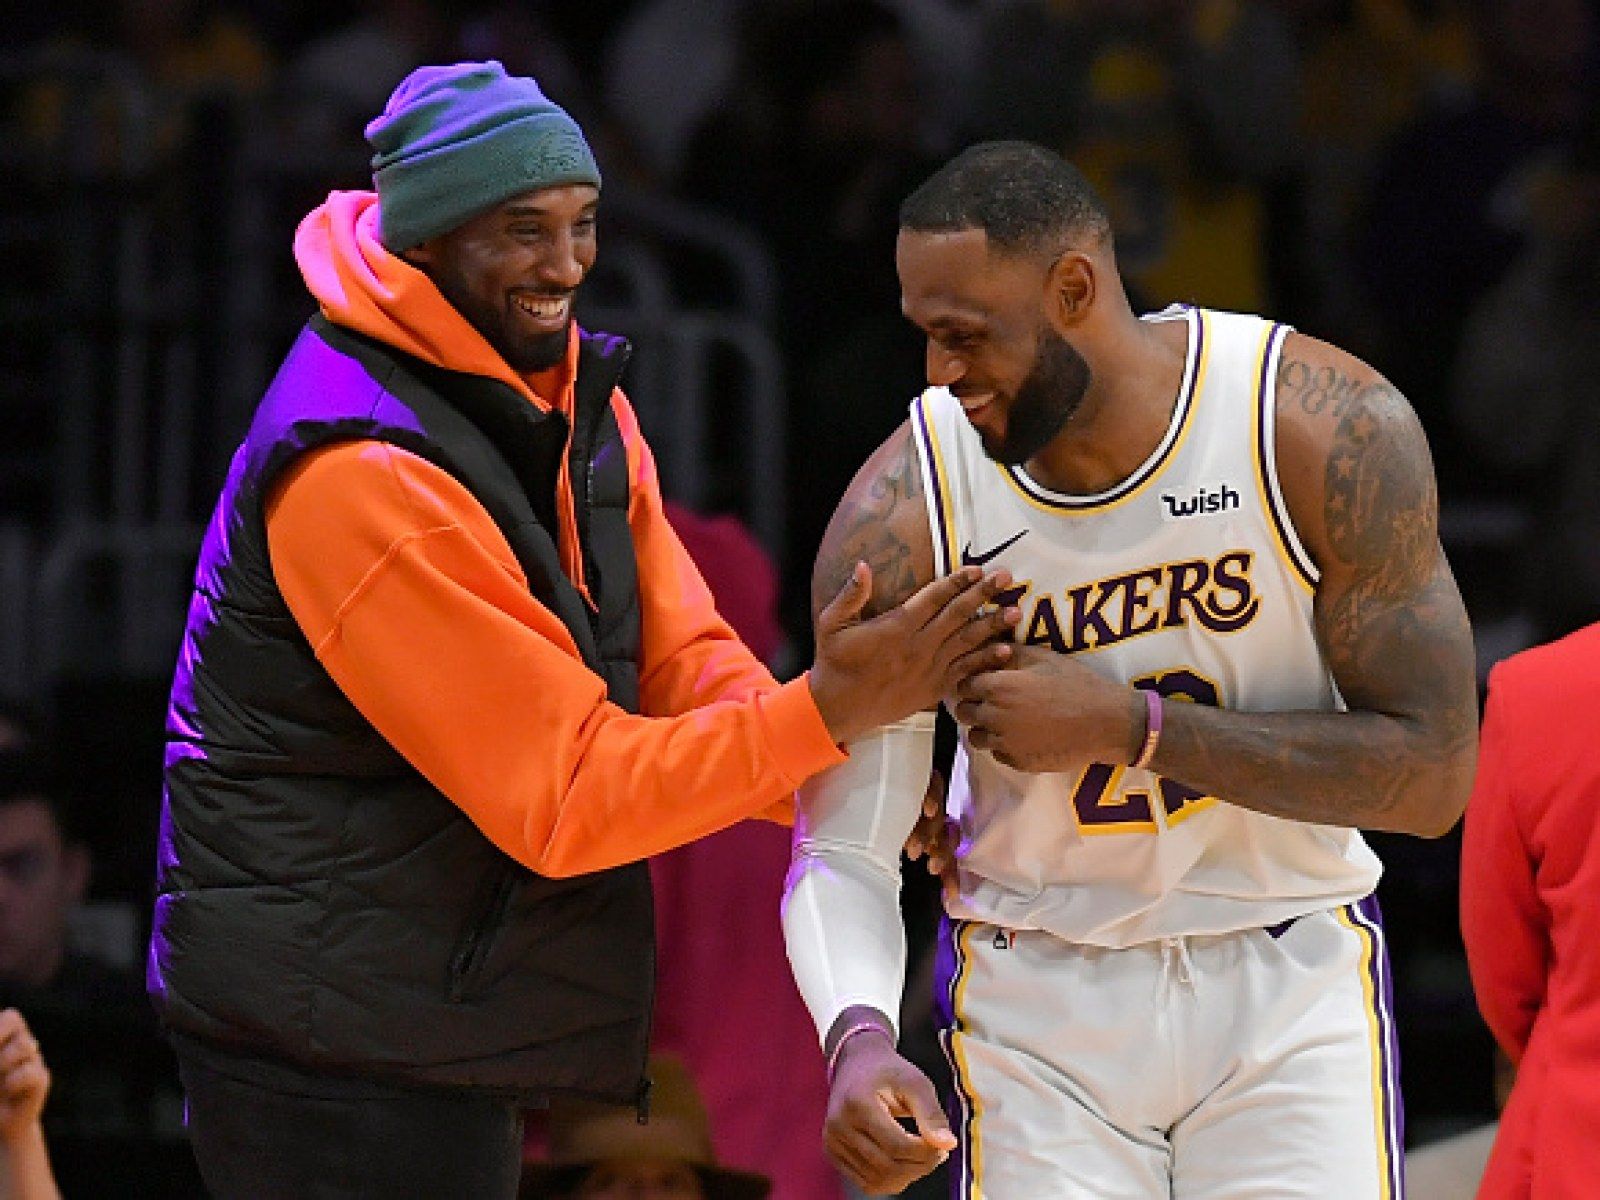 LeBron James Offers Follow Up Social Media Post Dedicated To Kobe Bryant